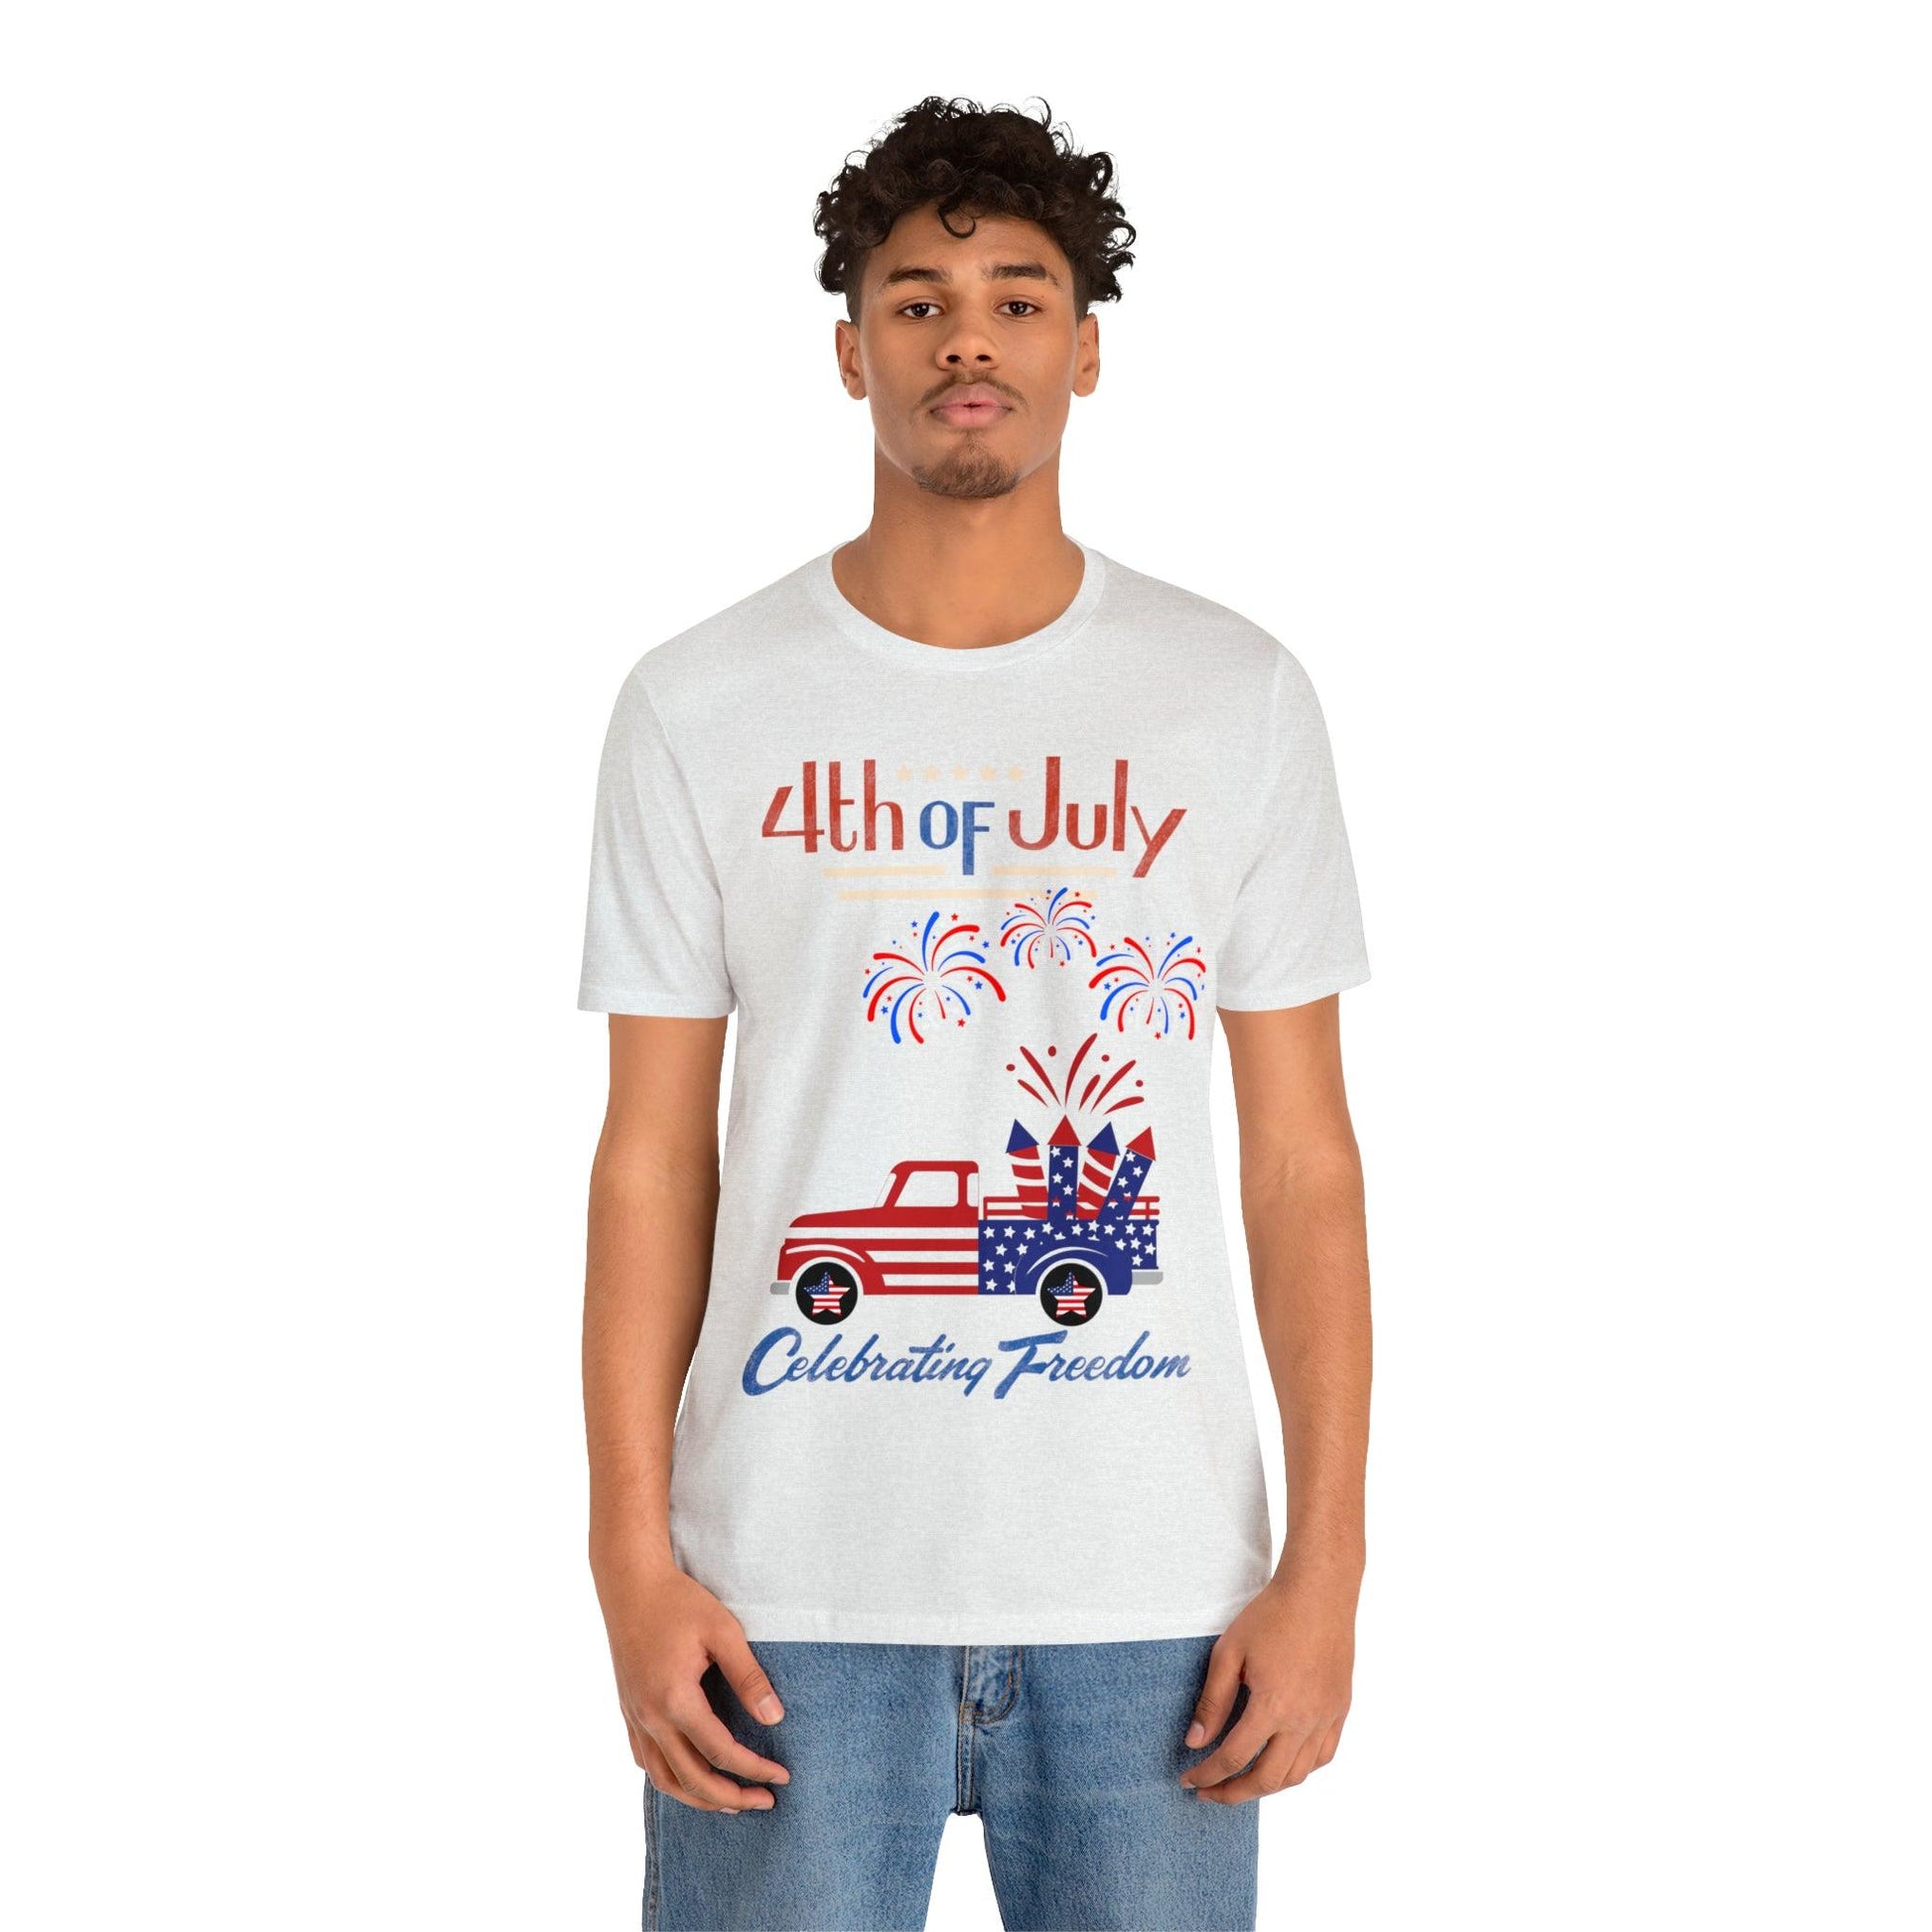 Celebrate Independence Day with Patriotic Shirts: 4th of July Shirts for Women and Men, Fireworks, Freedom, and Patriotic Designs - Giftsmojo